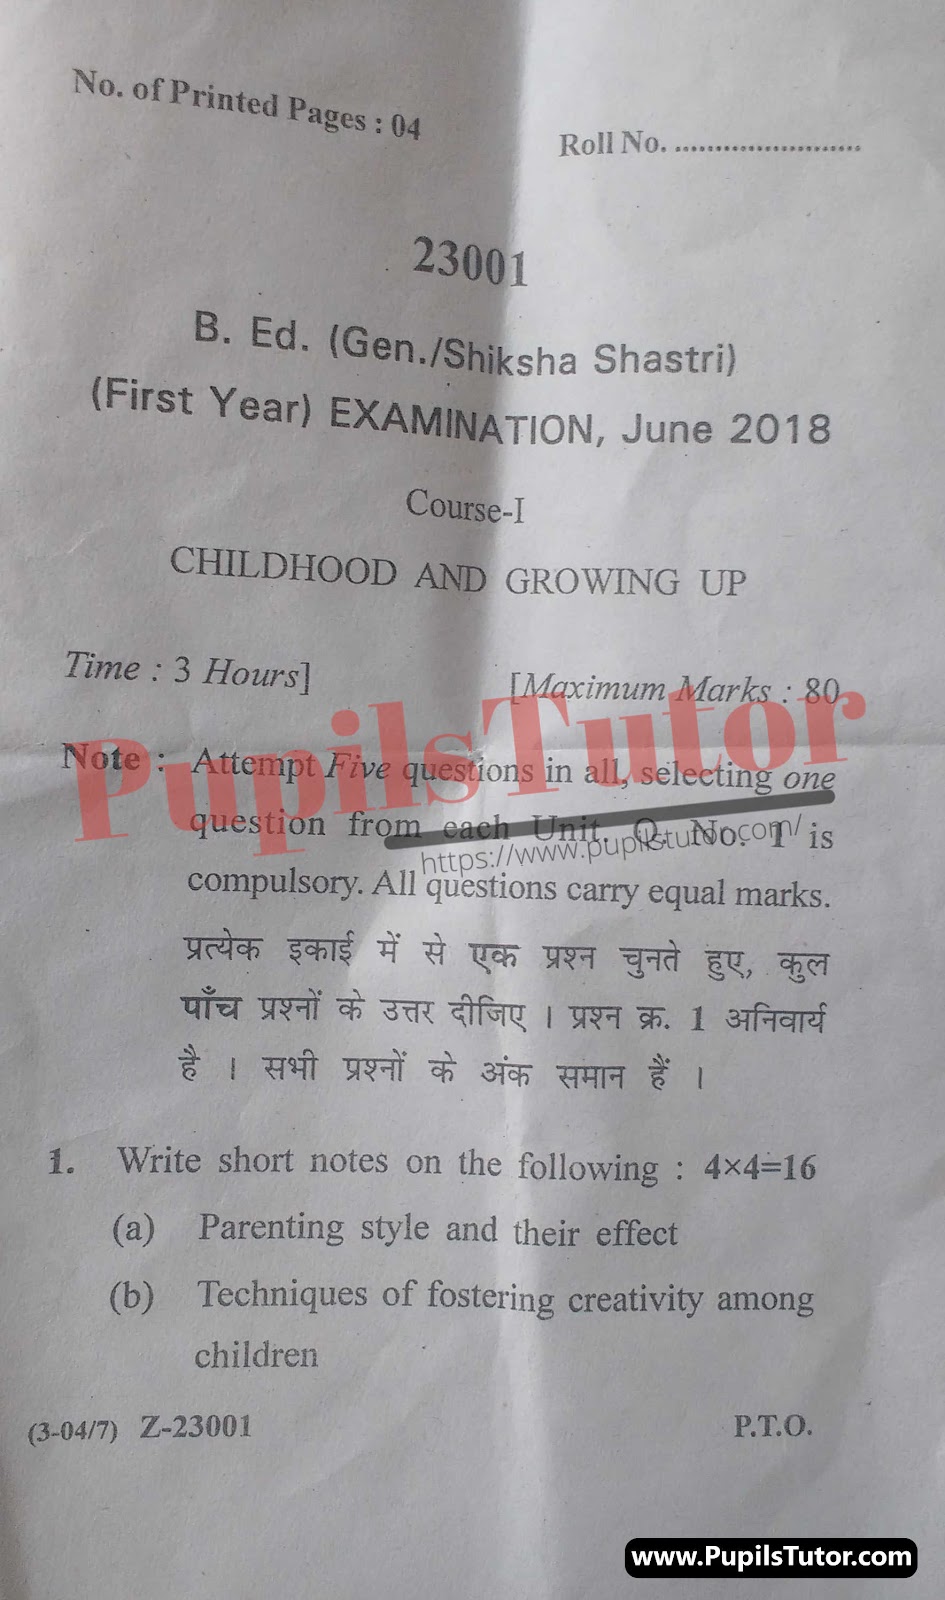 CRSU (Chaudhary Ranbir Singh University, Jind Haryana) BEd Regular Exam First Year Previous Year Childhood And Growing Up Question Paper For June, 2018 Exam (Question Paper Page 1) - pupilstutor.com